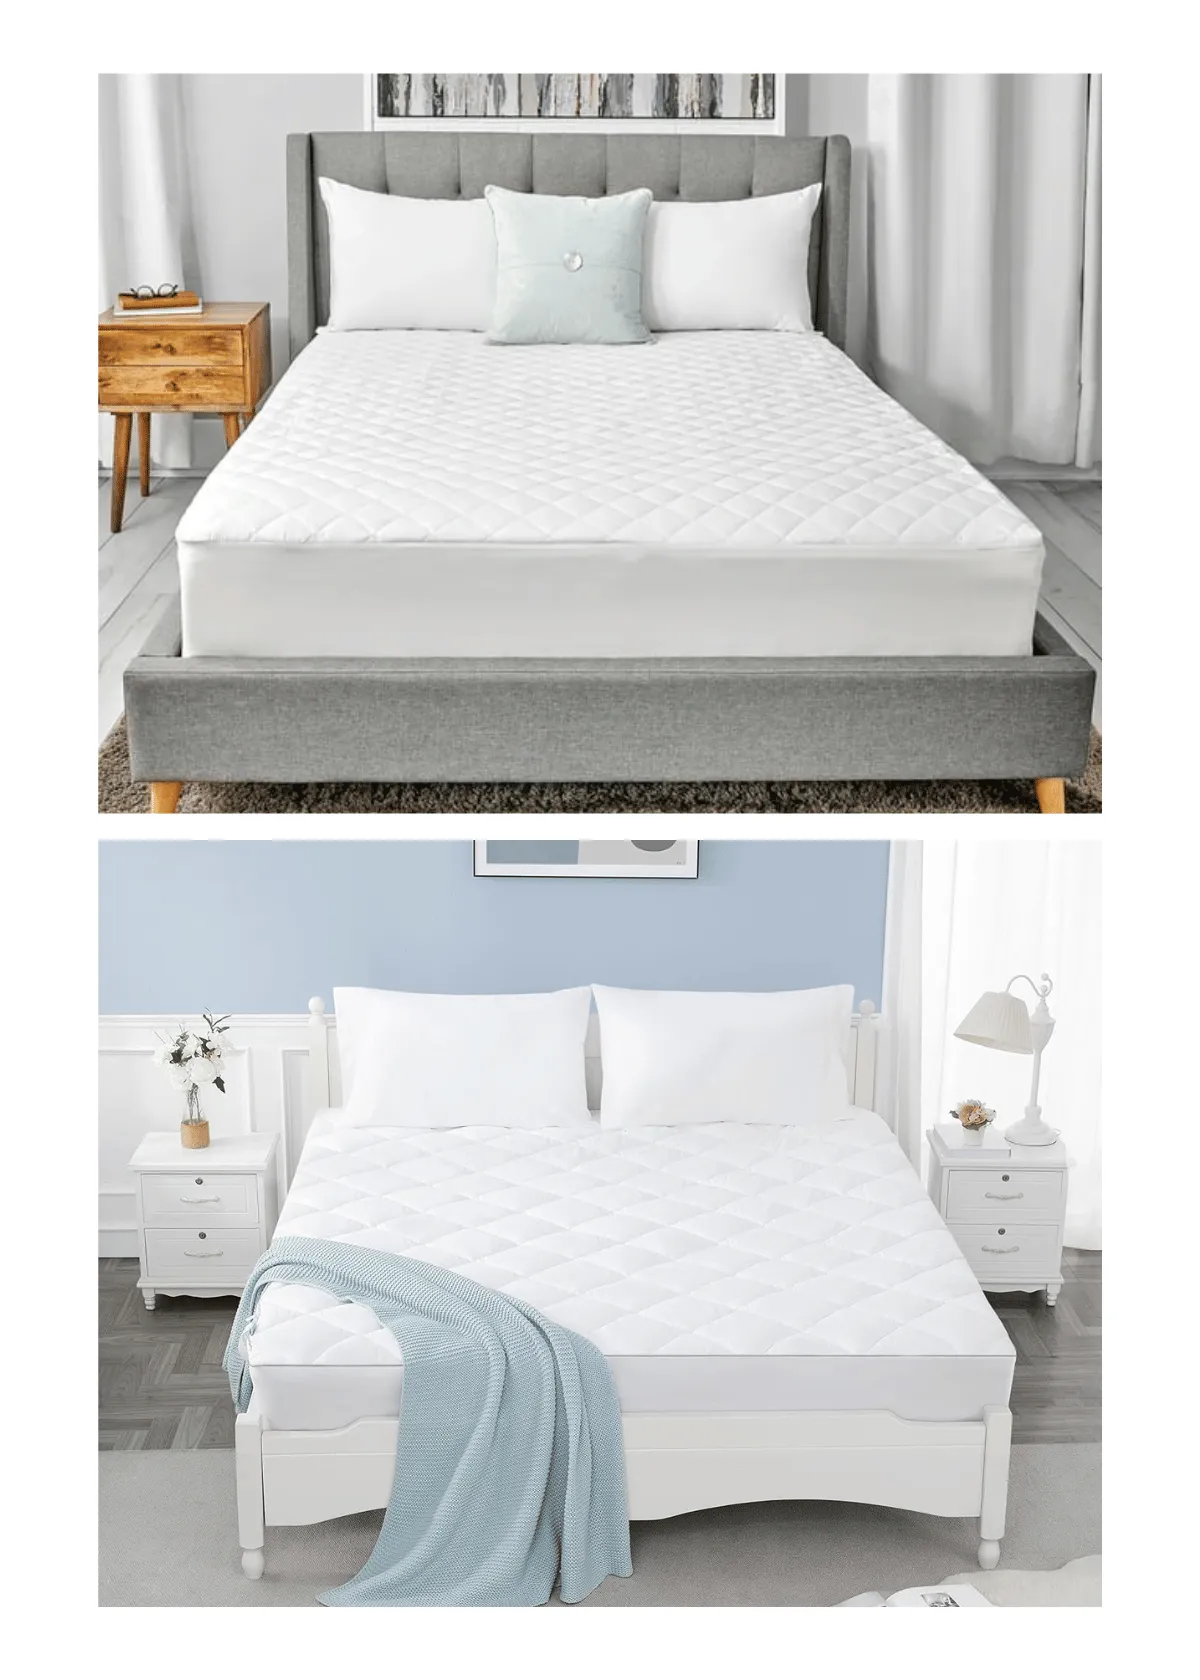 "How Does a Cotton Mattress Pad Improve Your Sleep Quality?"